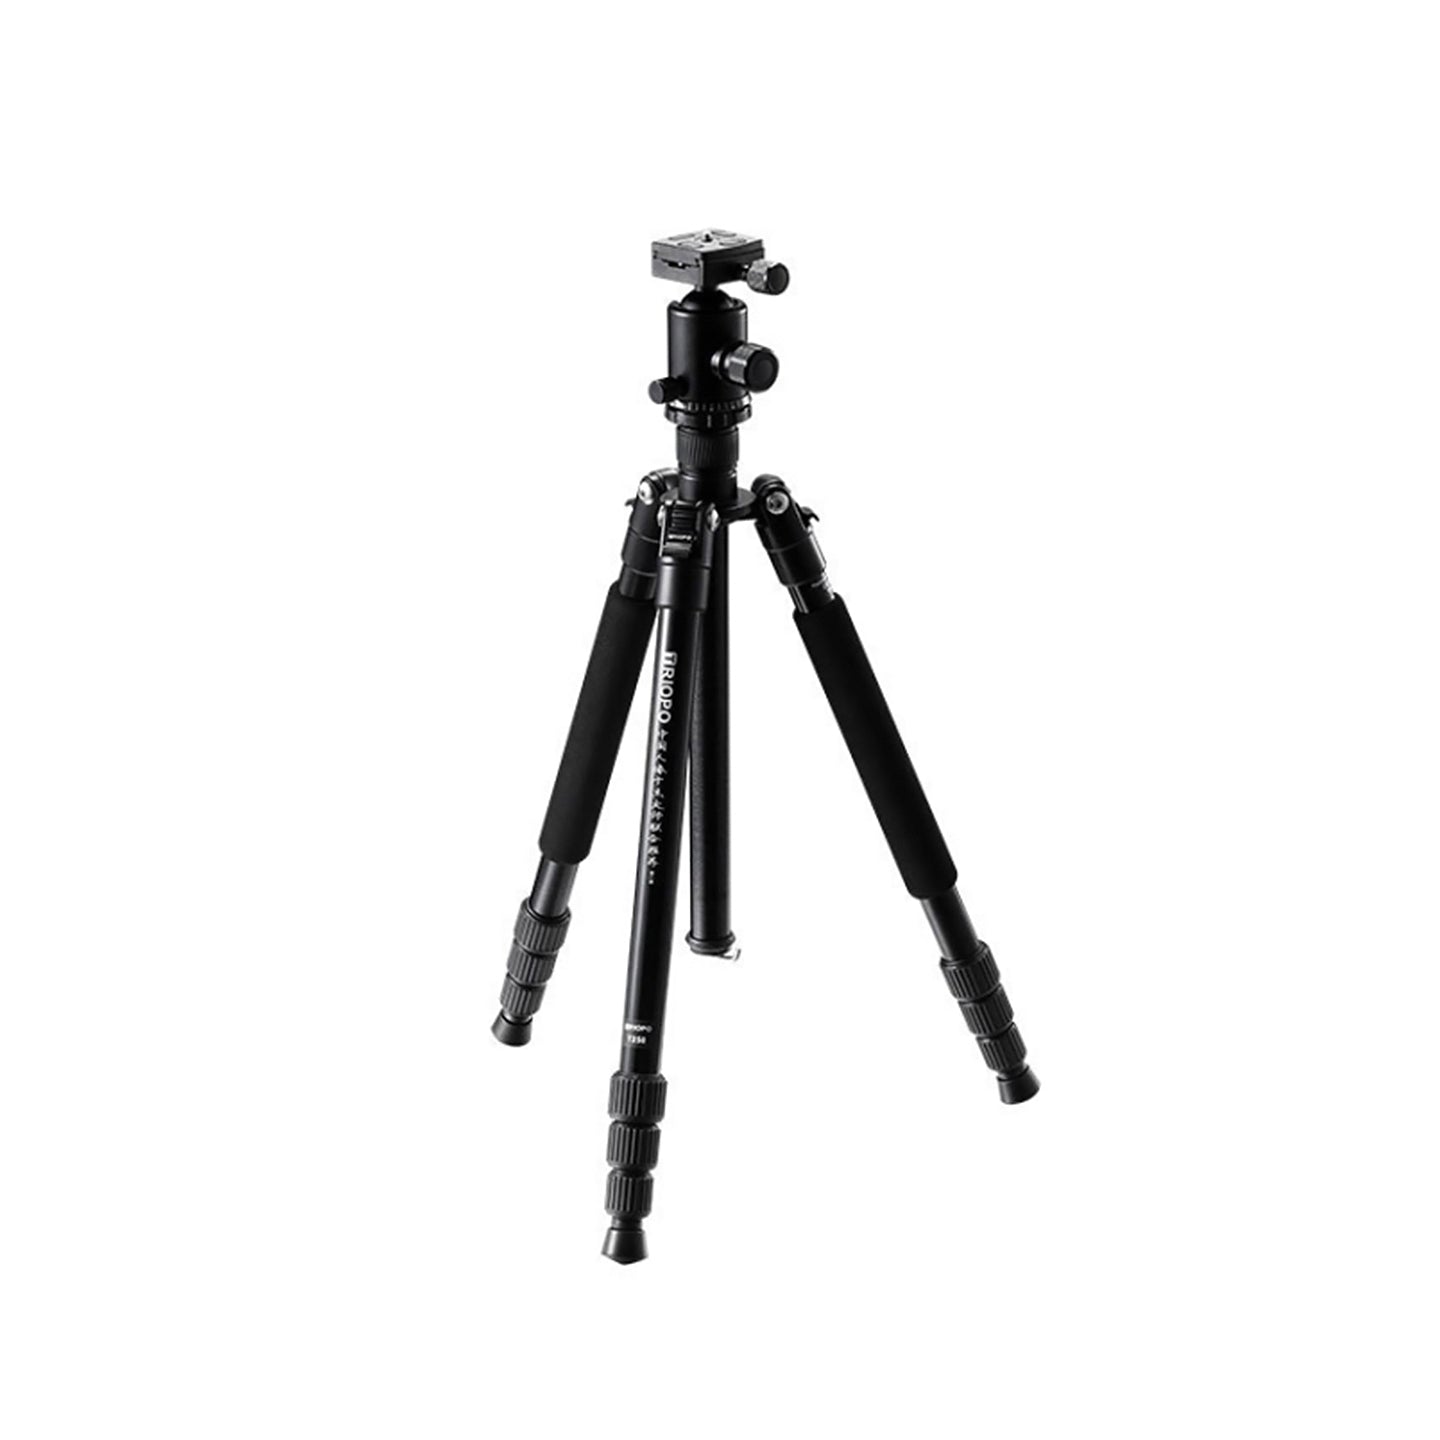 Triopo T258 Portable Professional Tripod Monopod with D2 Ball Head, 15kg Load Capacity for Travel, Film, Photography, Television | T258 D-2